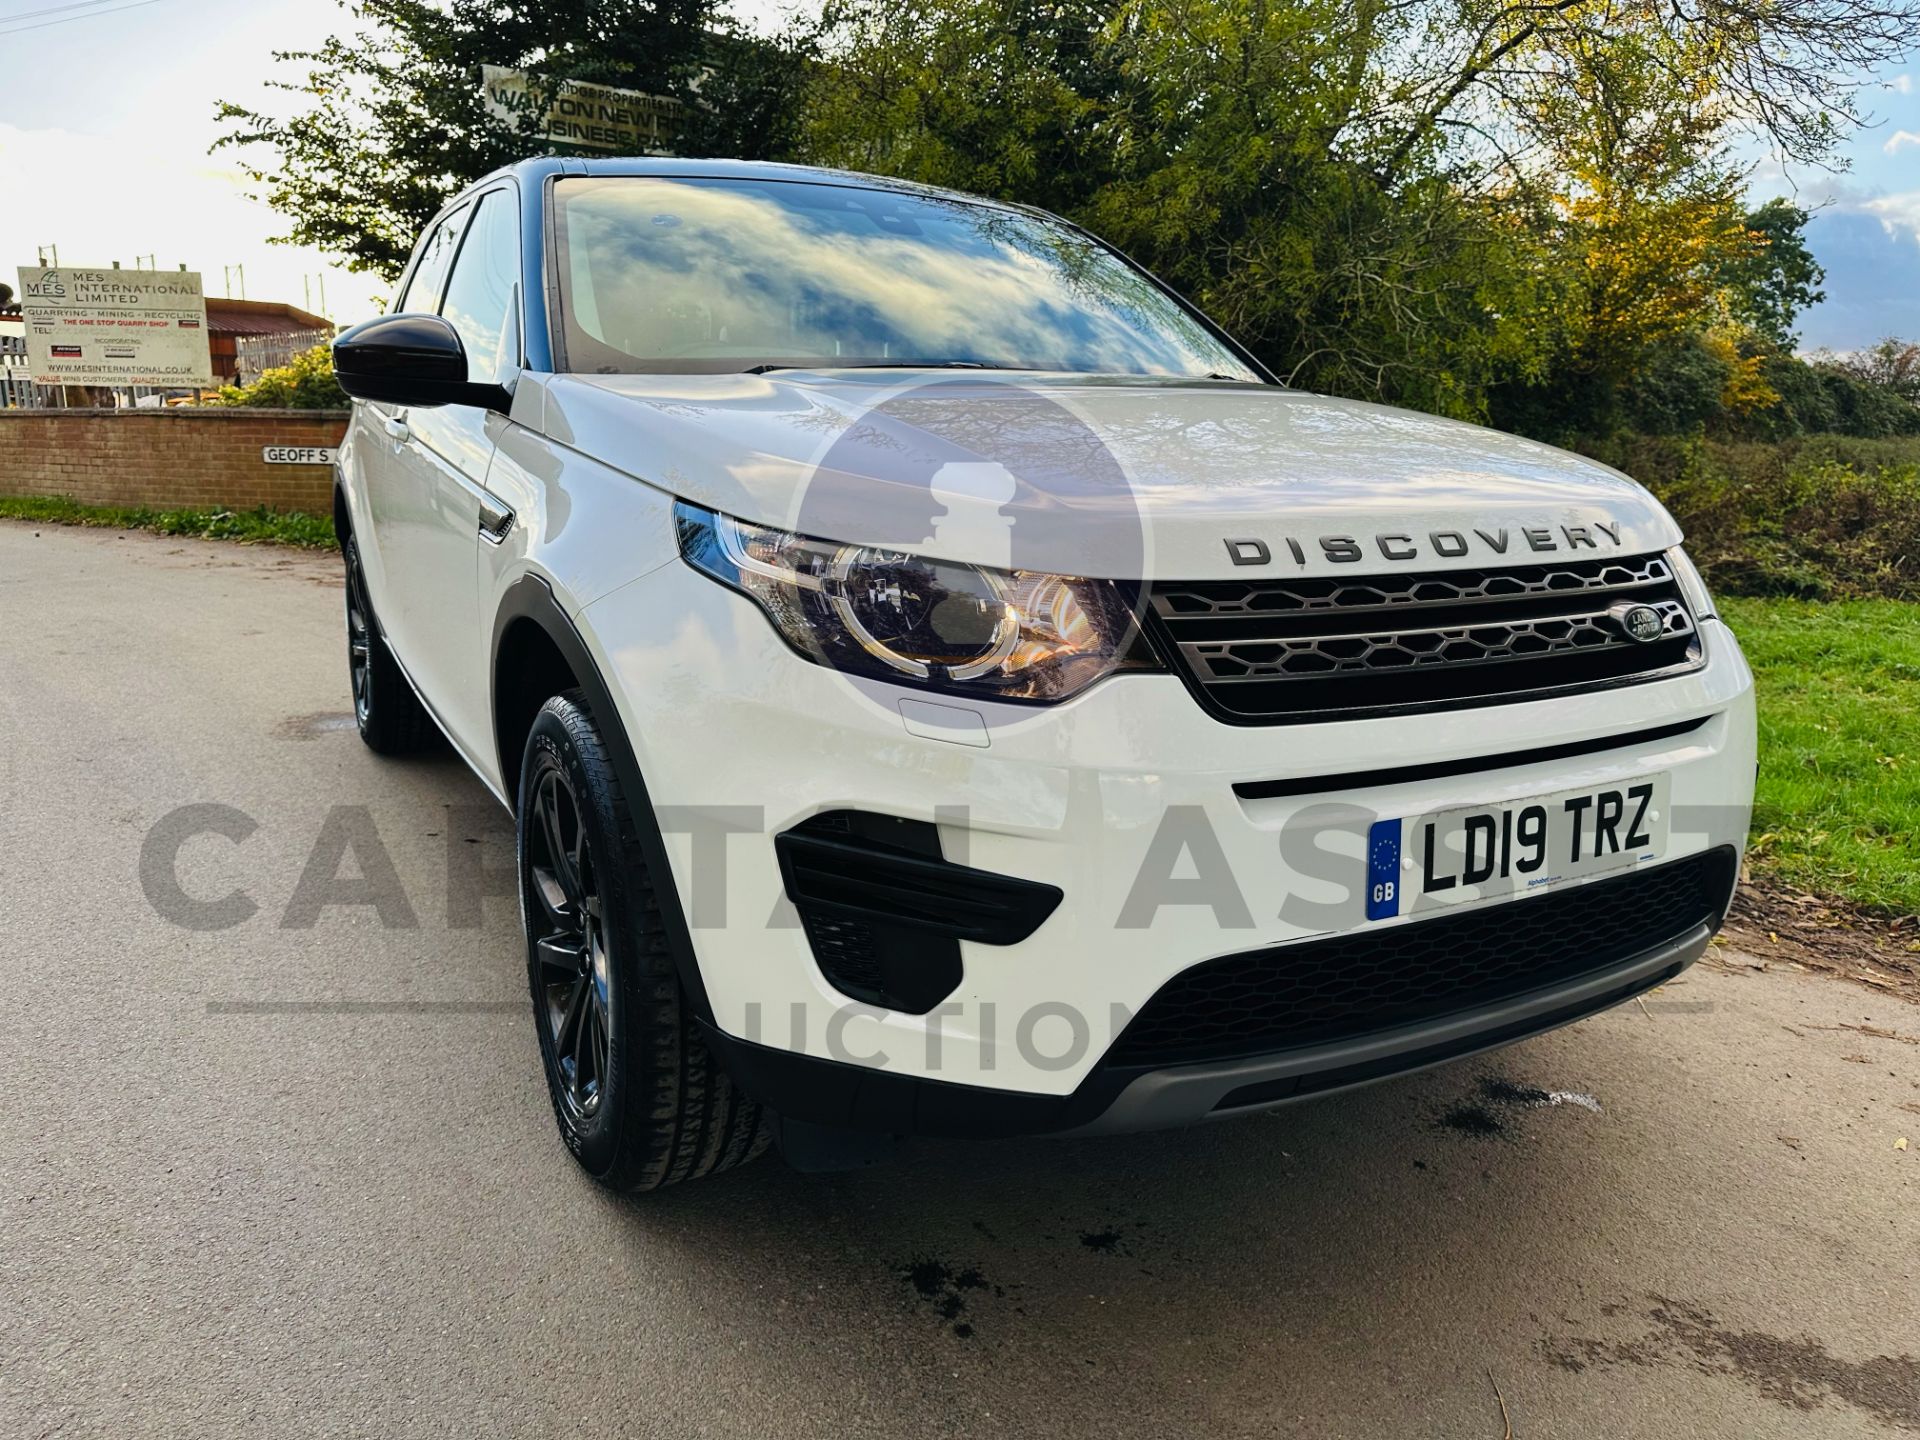 (On Sale) LAND ROVER DISCOVERY SPORT *SE* 5 DOOR SUV (2019 - EURO 6) 2.0 ED4 - AUTO STOP/START - Image 3 of 38